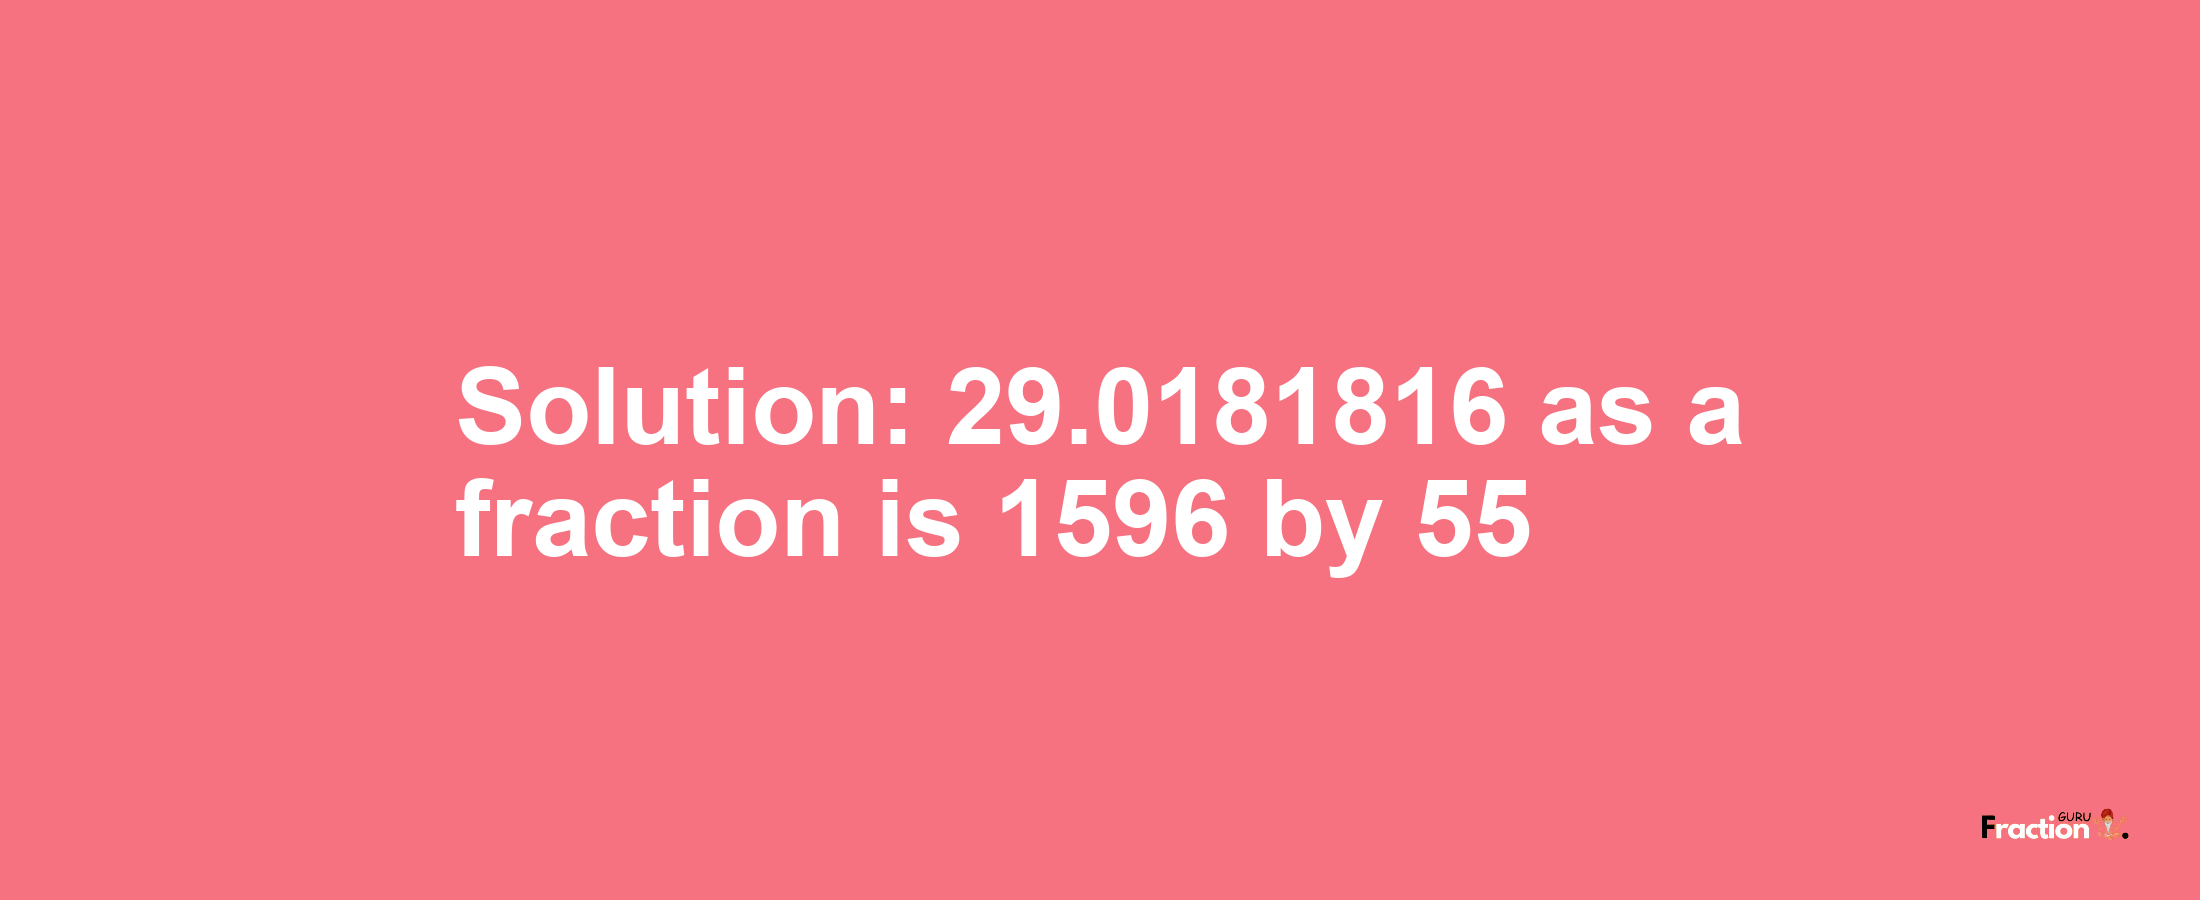 Solution:29.0181816 as a fraction is 1596/55